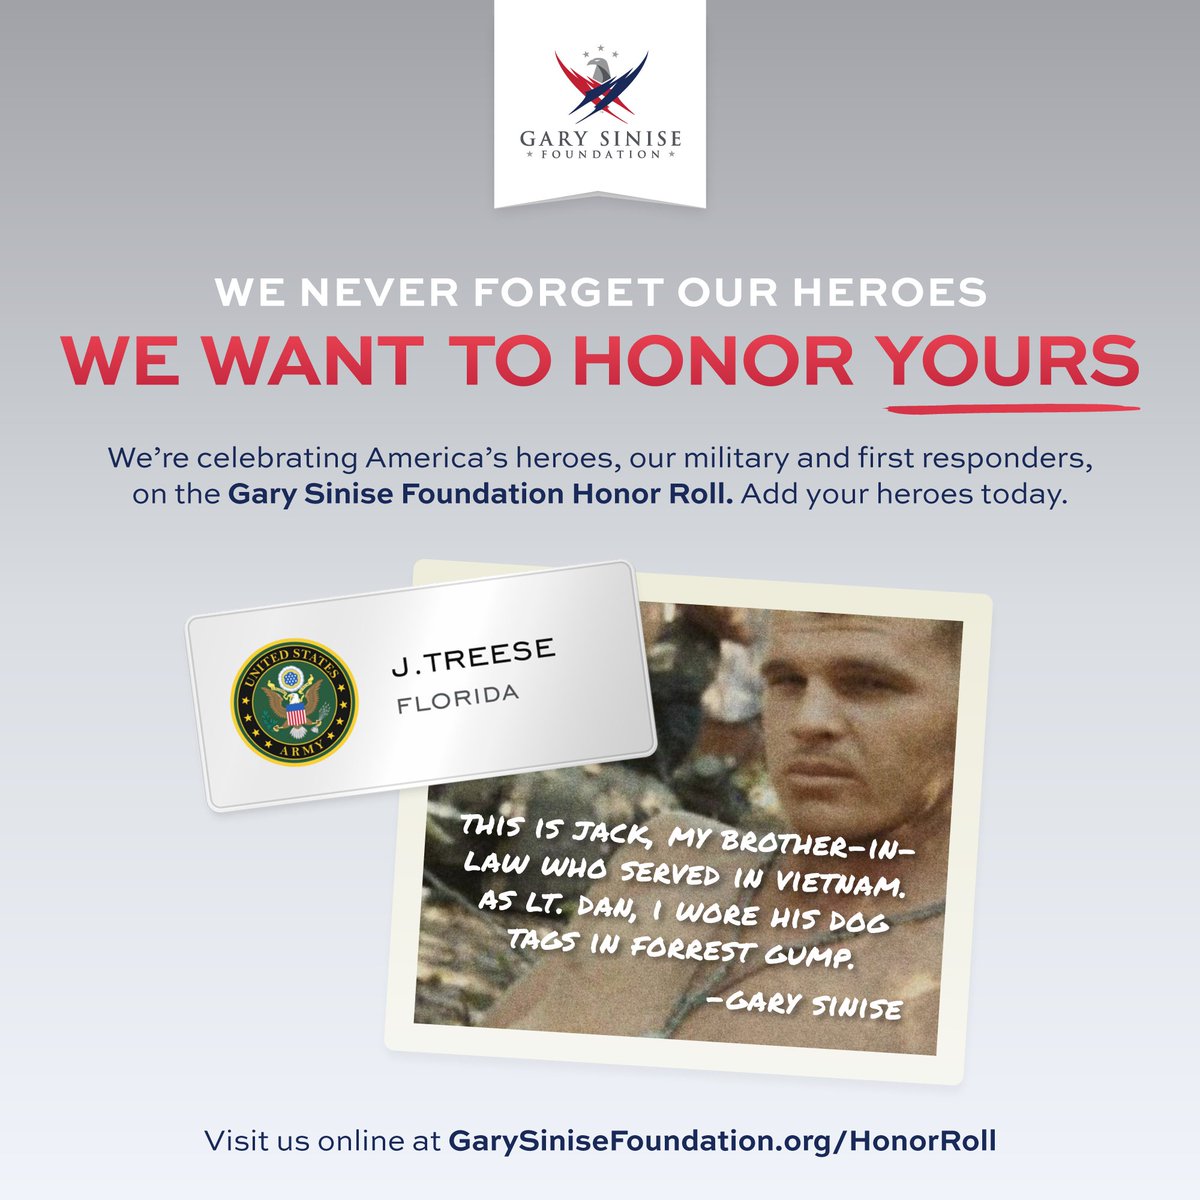 Join @GarySinise and honor those in your life who have served our country and communities by preserving their names on our Gary Sinise Foundation Honor Roll. Click on the link provided to honor your hero today: bit.ly/3F7PqC6